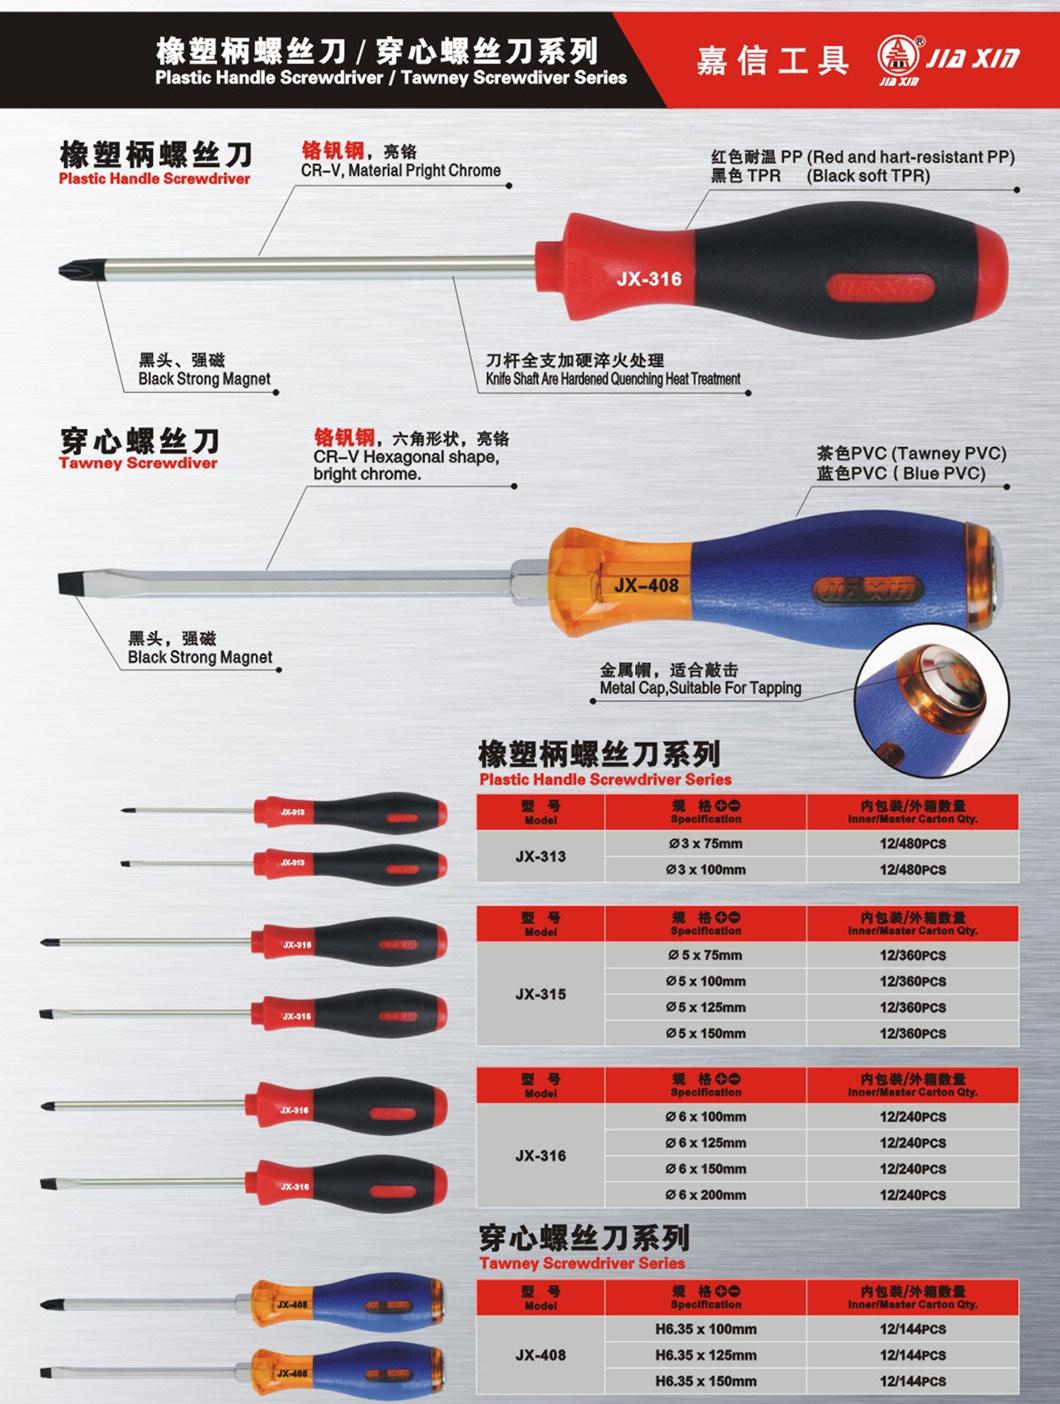 High Quality Specifications Have Large Small Set Screwdriver